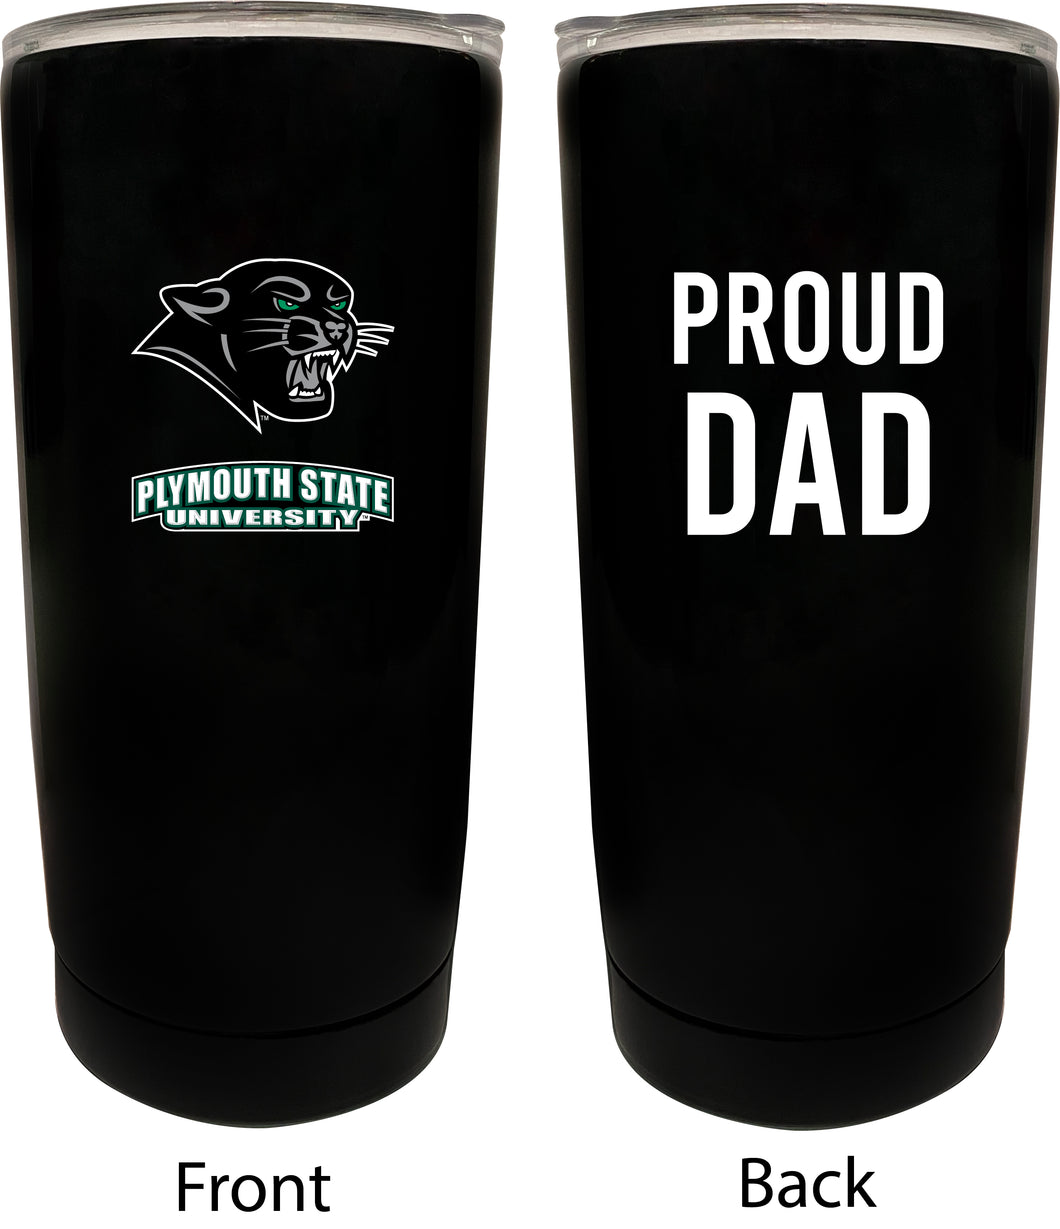 Plymouth State University NCAA Insulated Tumbler - 16oz Stainless Steel Travel Mug Proud Dad Design Black